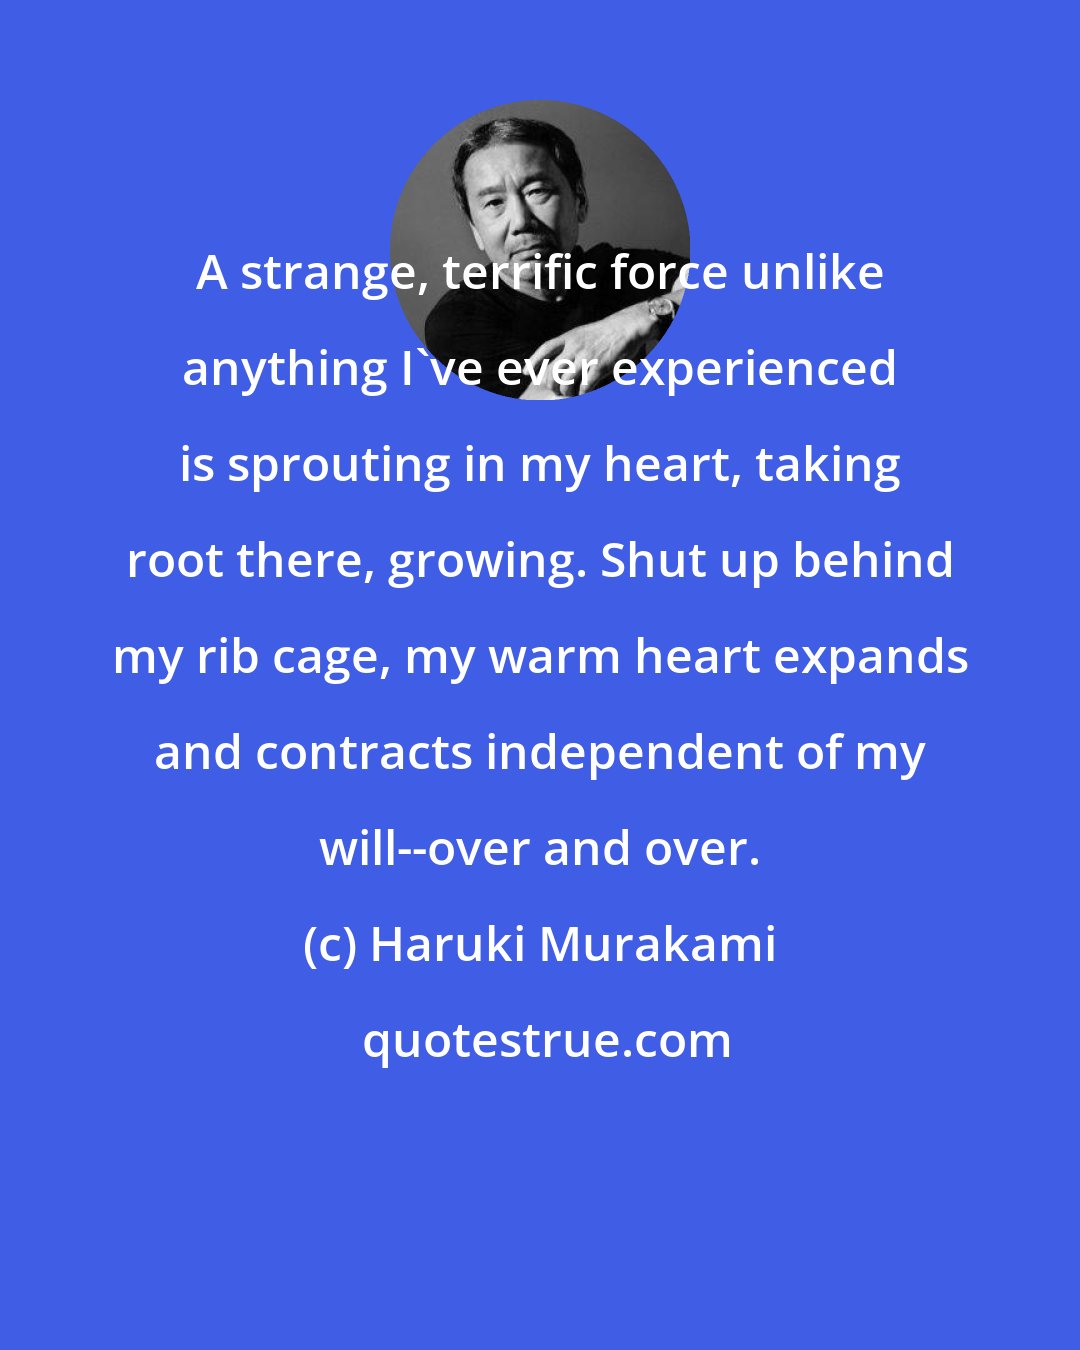 Haruki Murakami: A strange, terrific force unlike anything I've ever experienced is sprouting in my heart, taking root there, growing. Shut up behind my rib cage, my warm heart expands and contracts independent of my will--over and over.